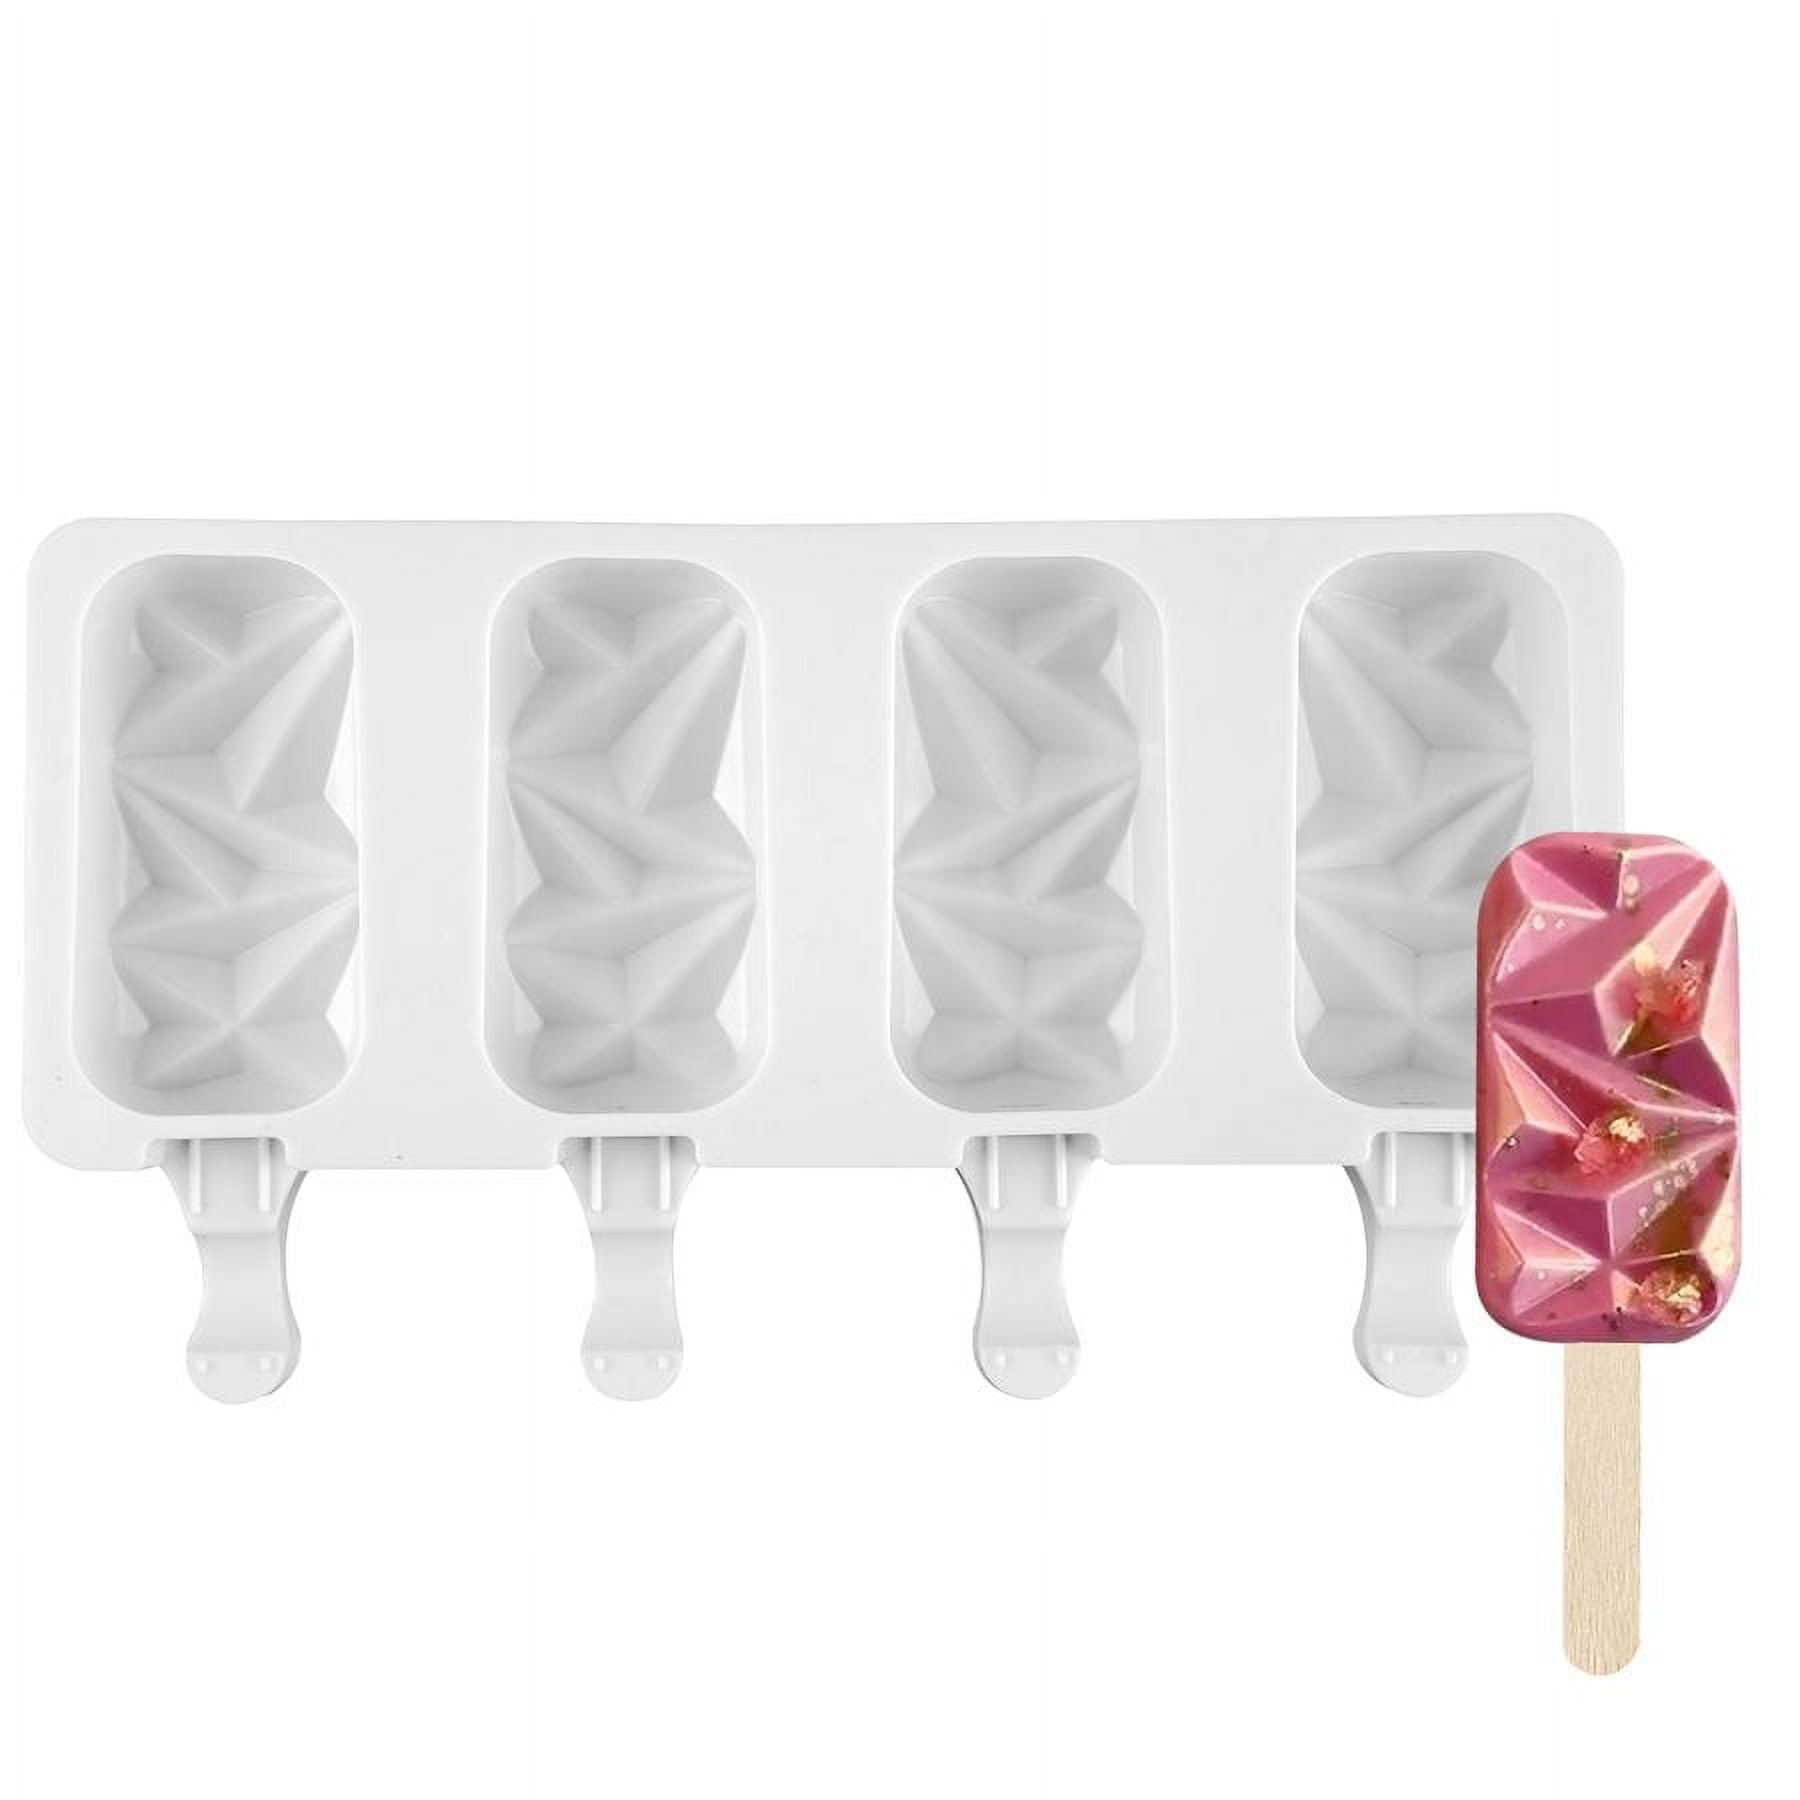 Zubebe 8 Pcs Silicone Ice Cream Mold 4 Cavity Ice Lolly Mold Reusable  Diamond and Cakesicle shaped Cakesicles Mold with 200 Pcs of Wooden Sticks  for